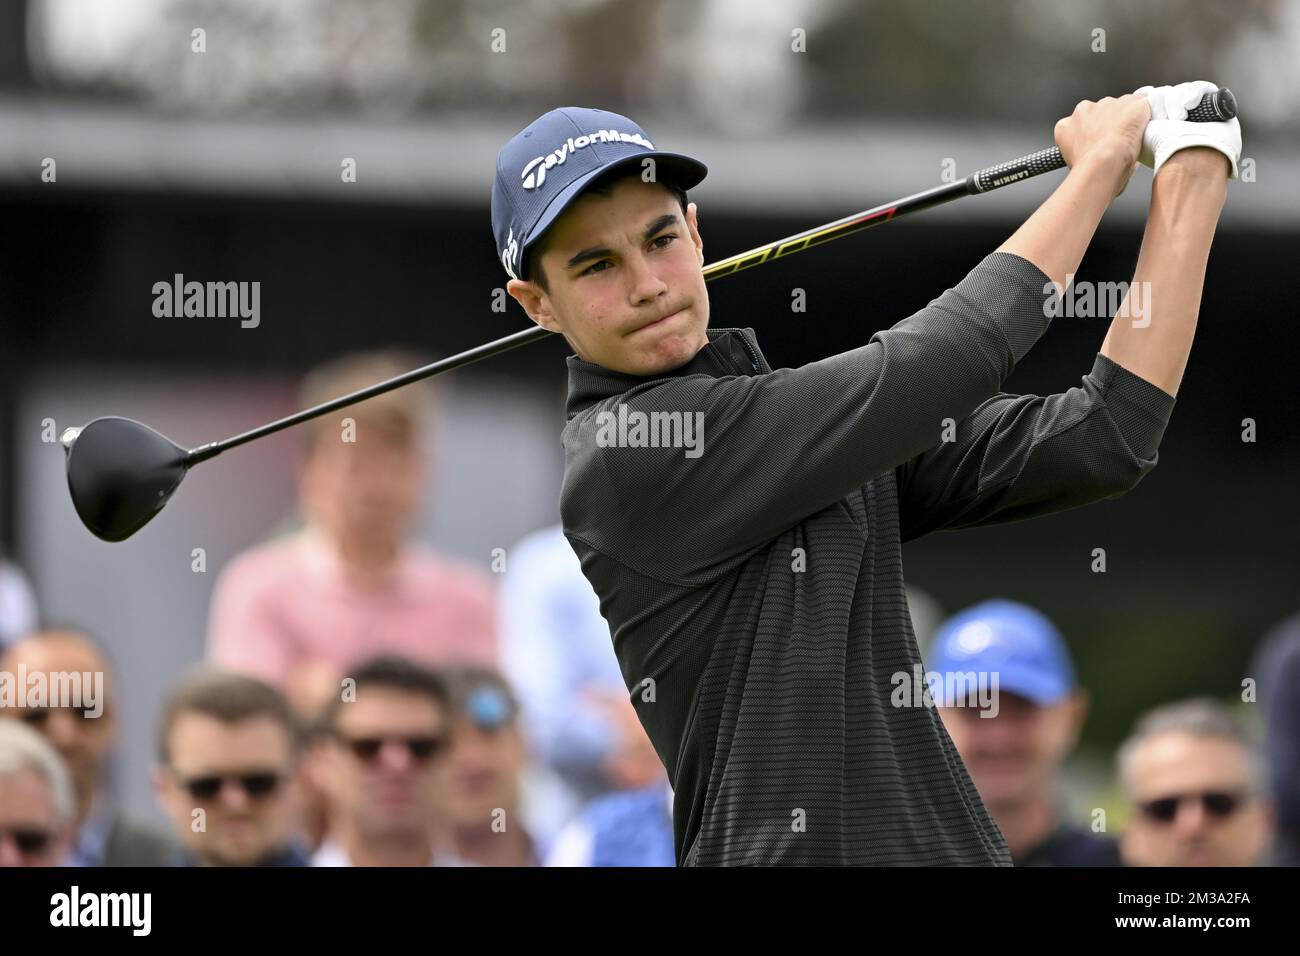 Ukraine's Lev Grinberg pictured during the second round of the Soudal Open  golf tournament, in Schilde, Friday 13 May 2022. The Soudal Open, a  tournament of the DP World Tour, takes place